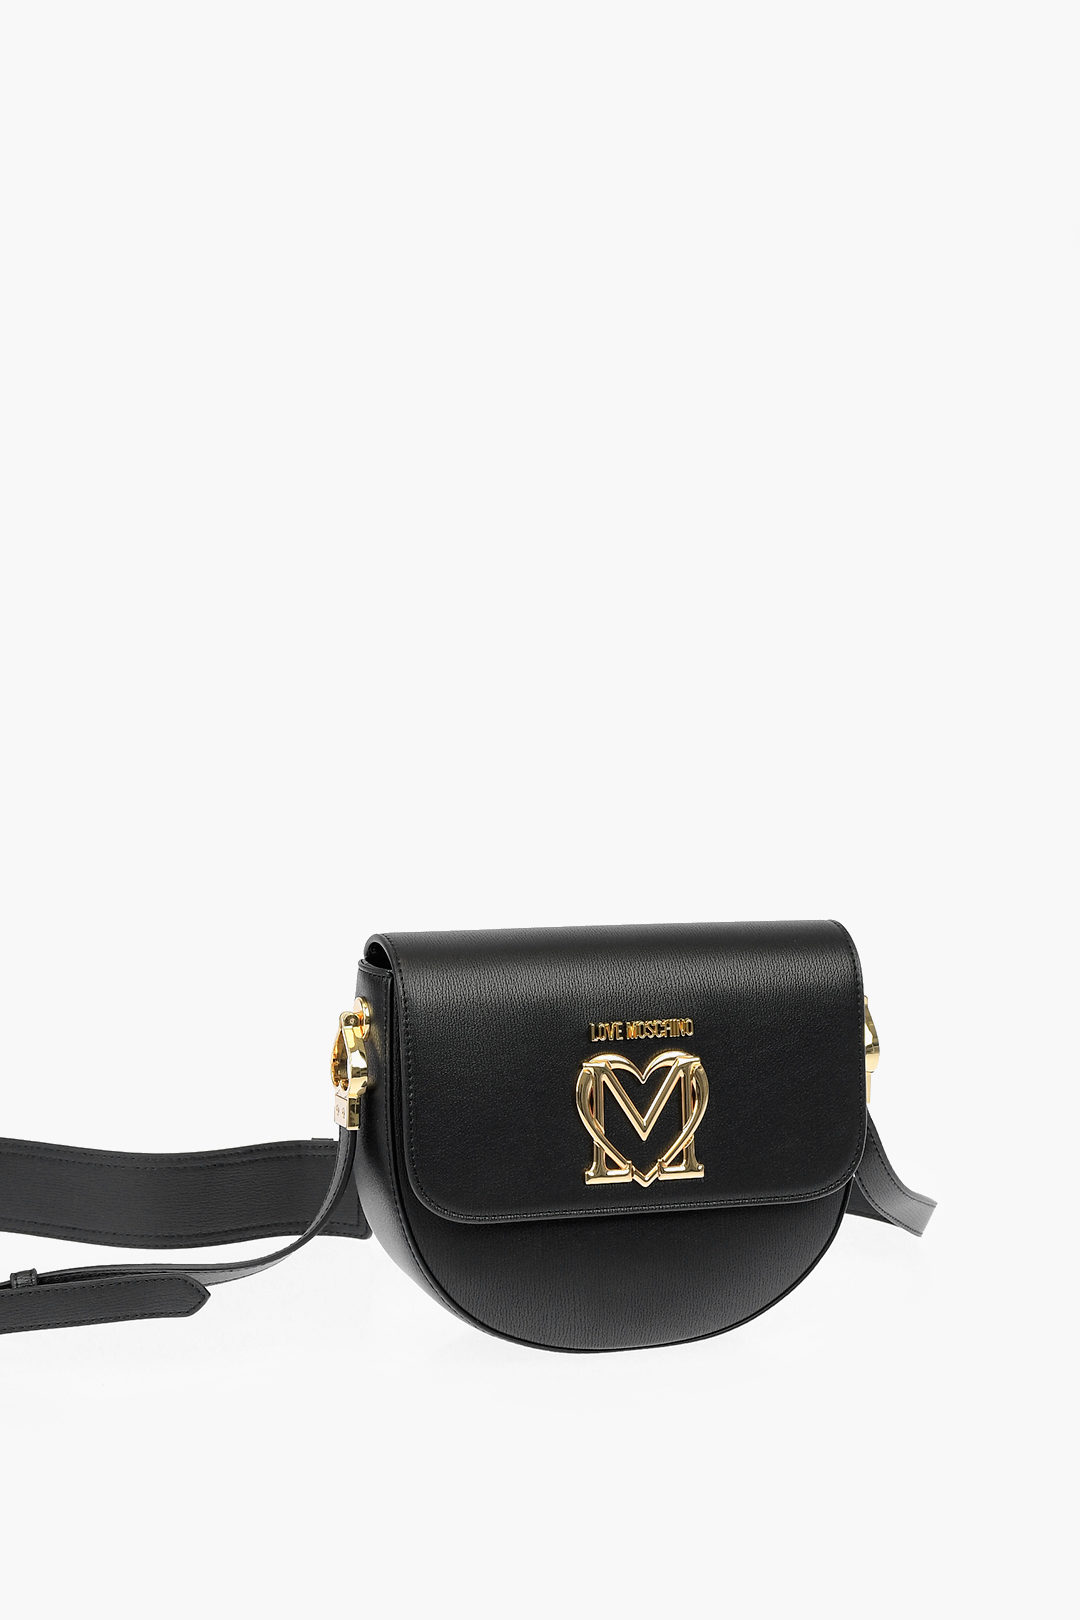 Moschino LOVE faux leather crossbody saddle bag with golden logo